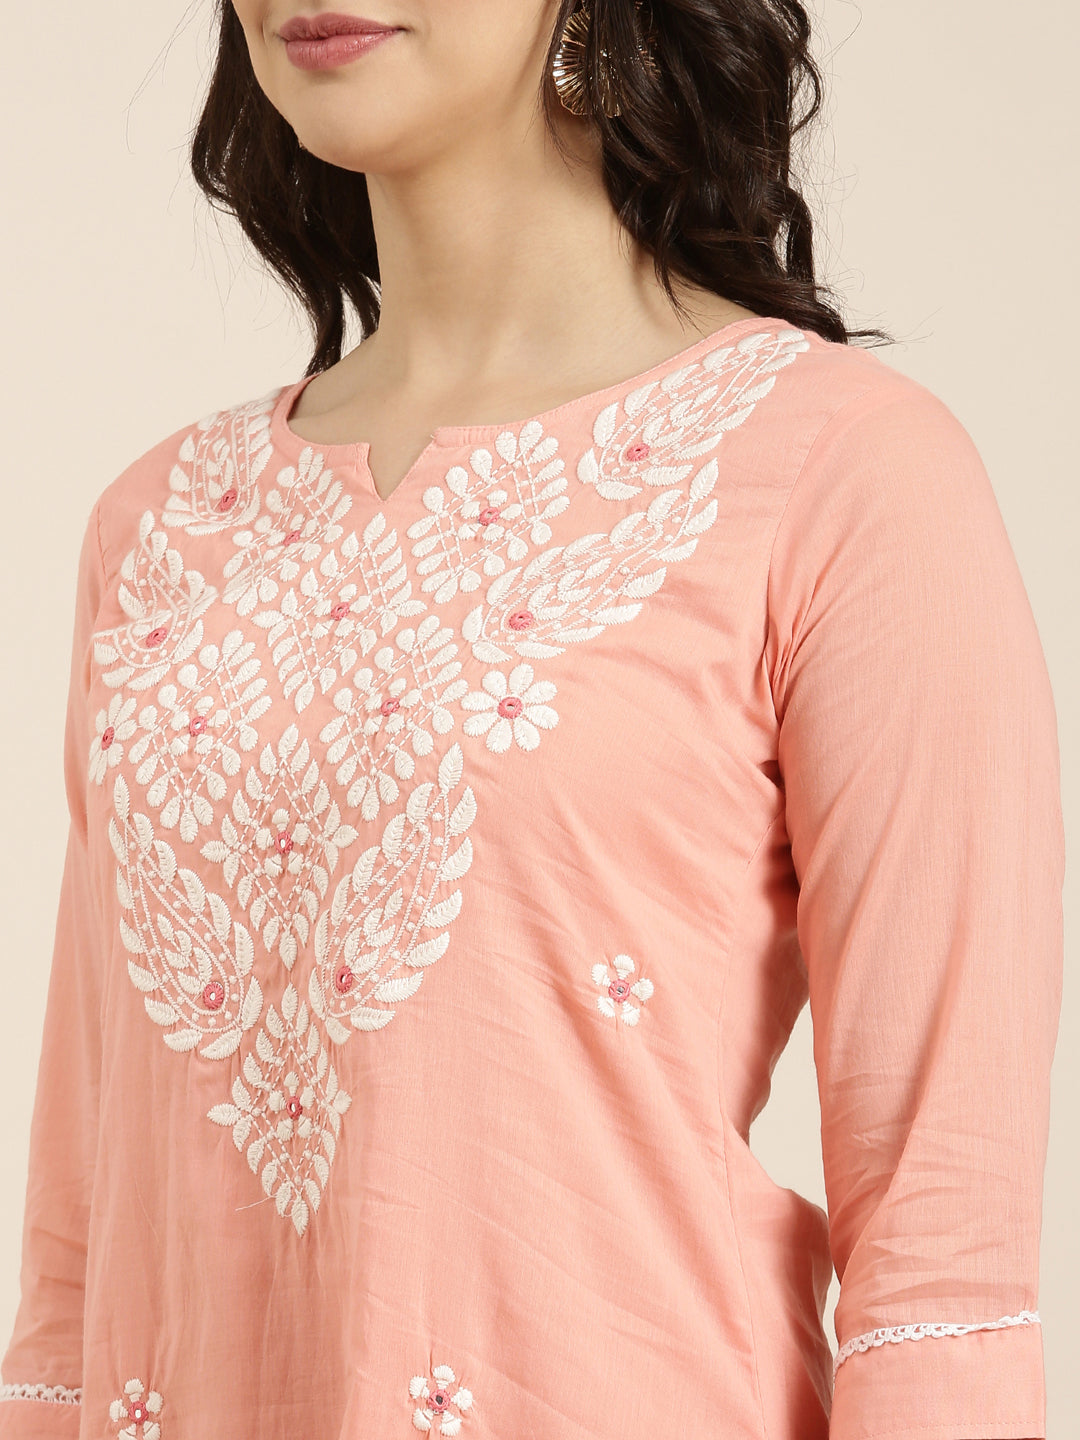 Women Straight Peach Solid Kurta and Trousers Set Comes With Dupatta